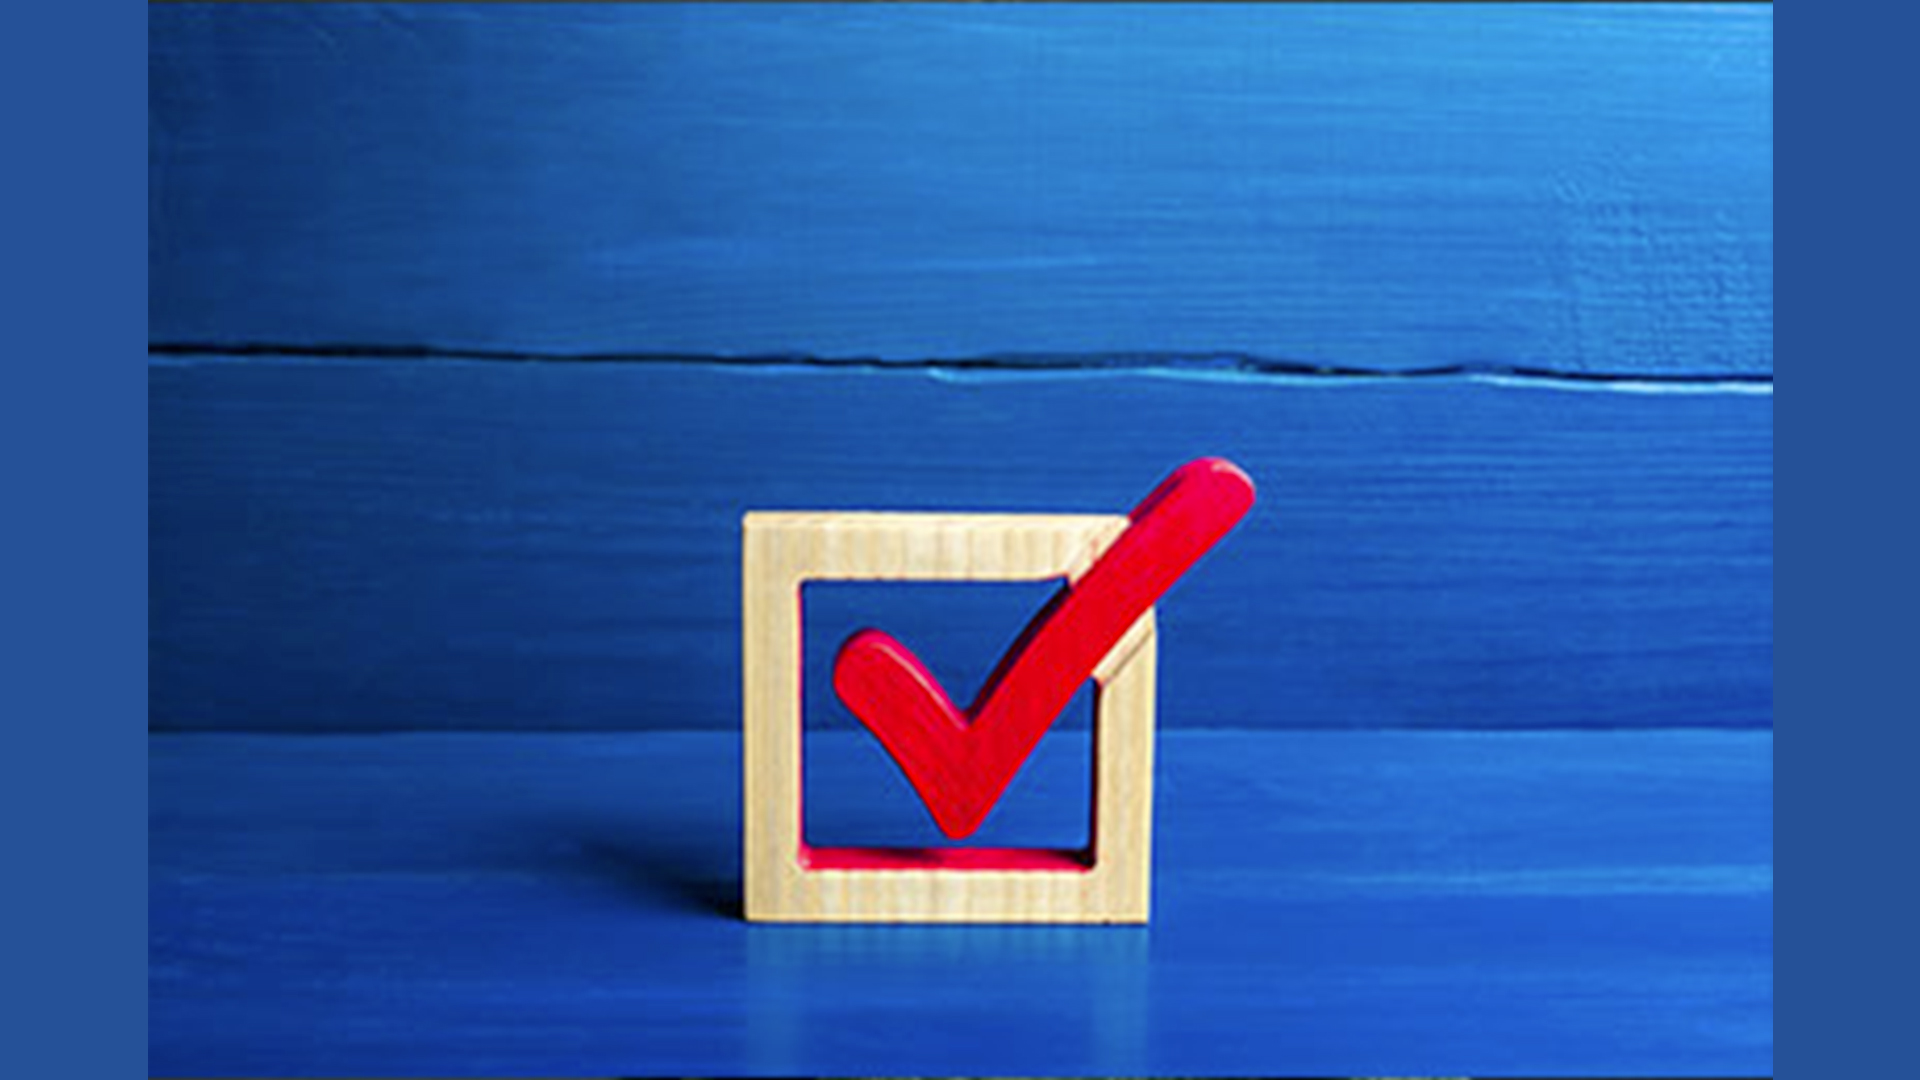 A wooden box with a red checkmark in the middle on a blue background